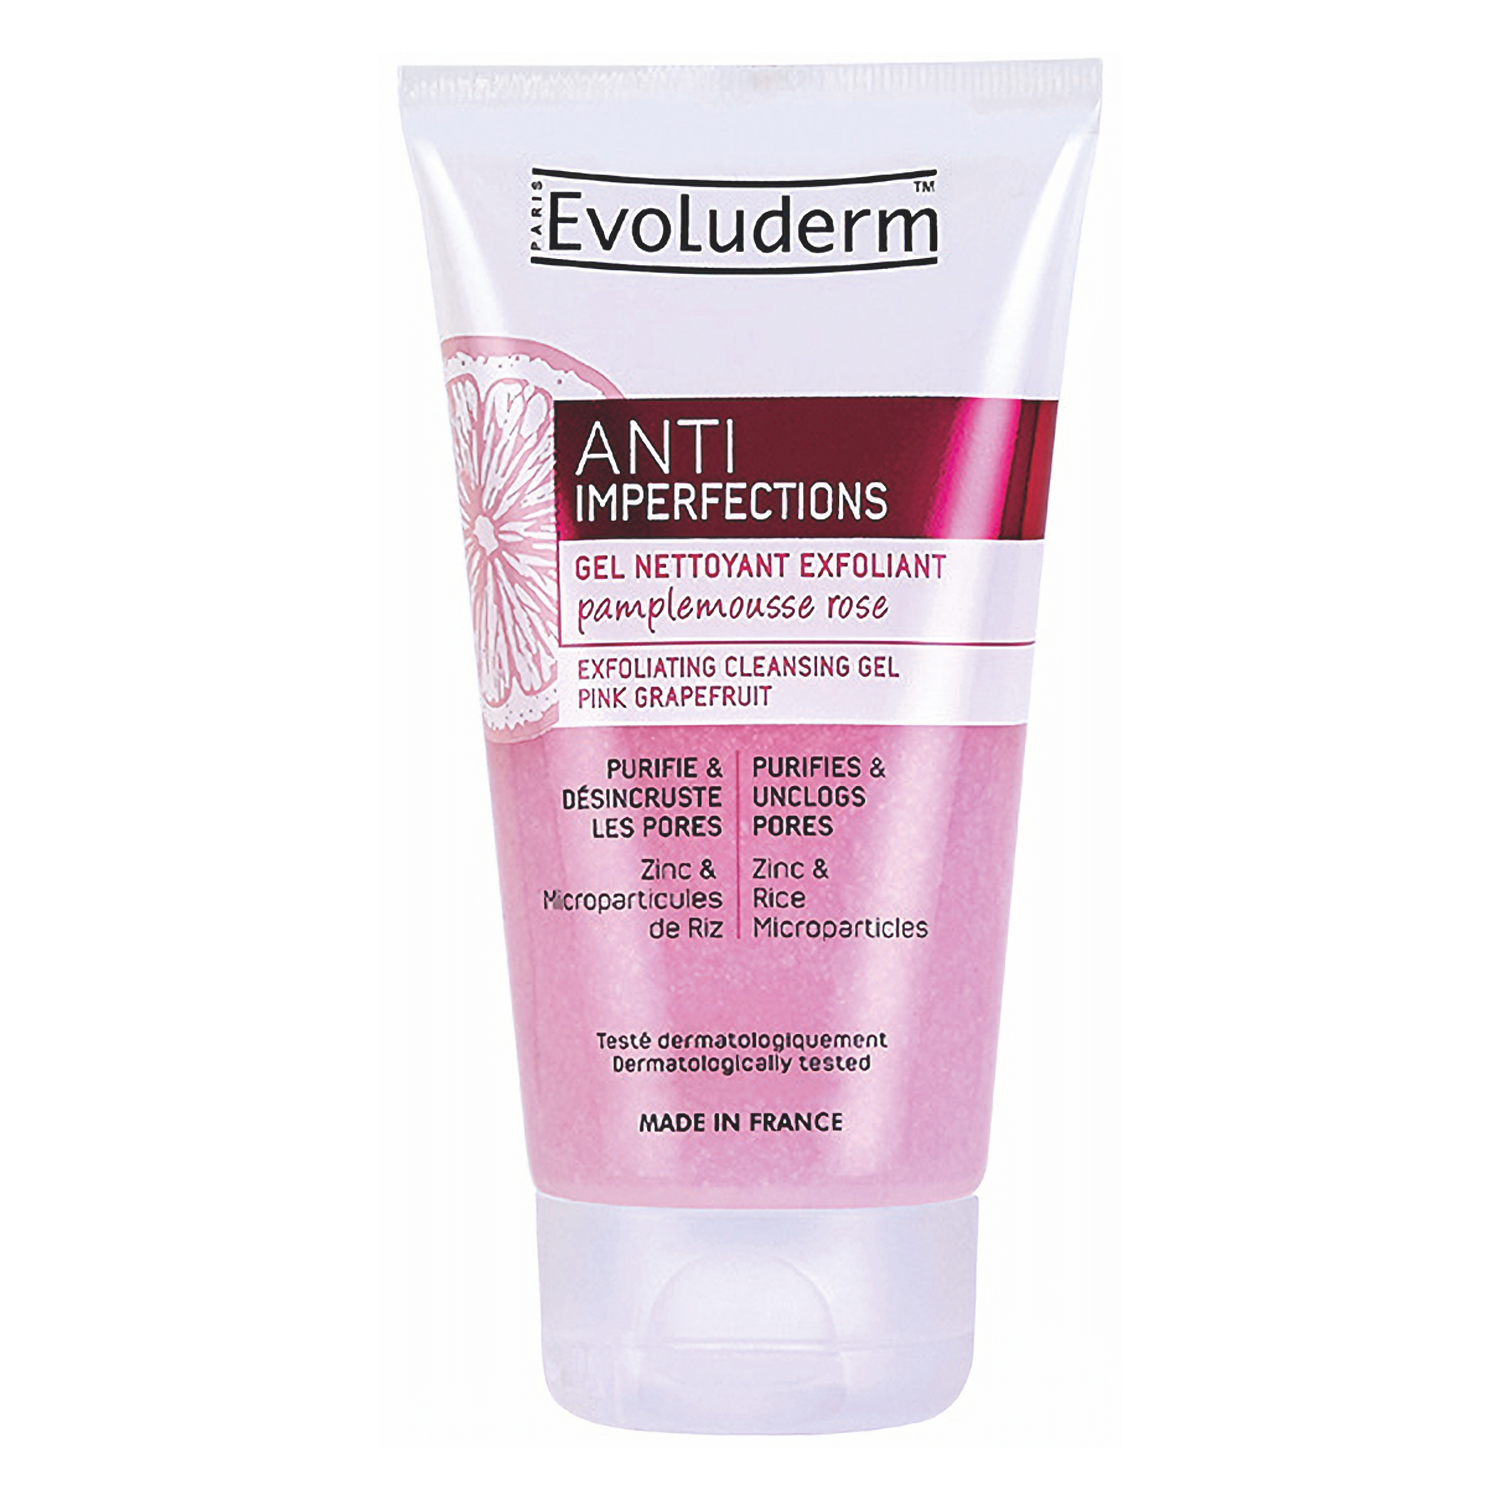 Evoluderm Anti-Imperfections Exfoliating Cleansing Gel